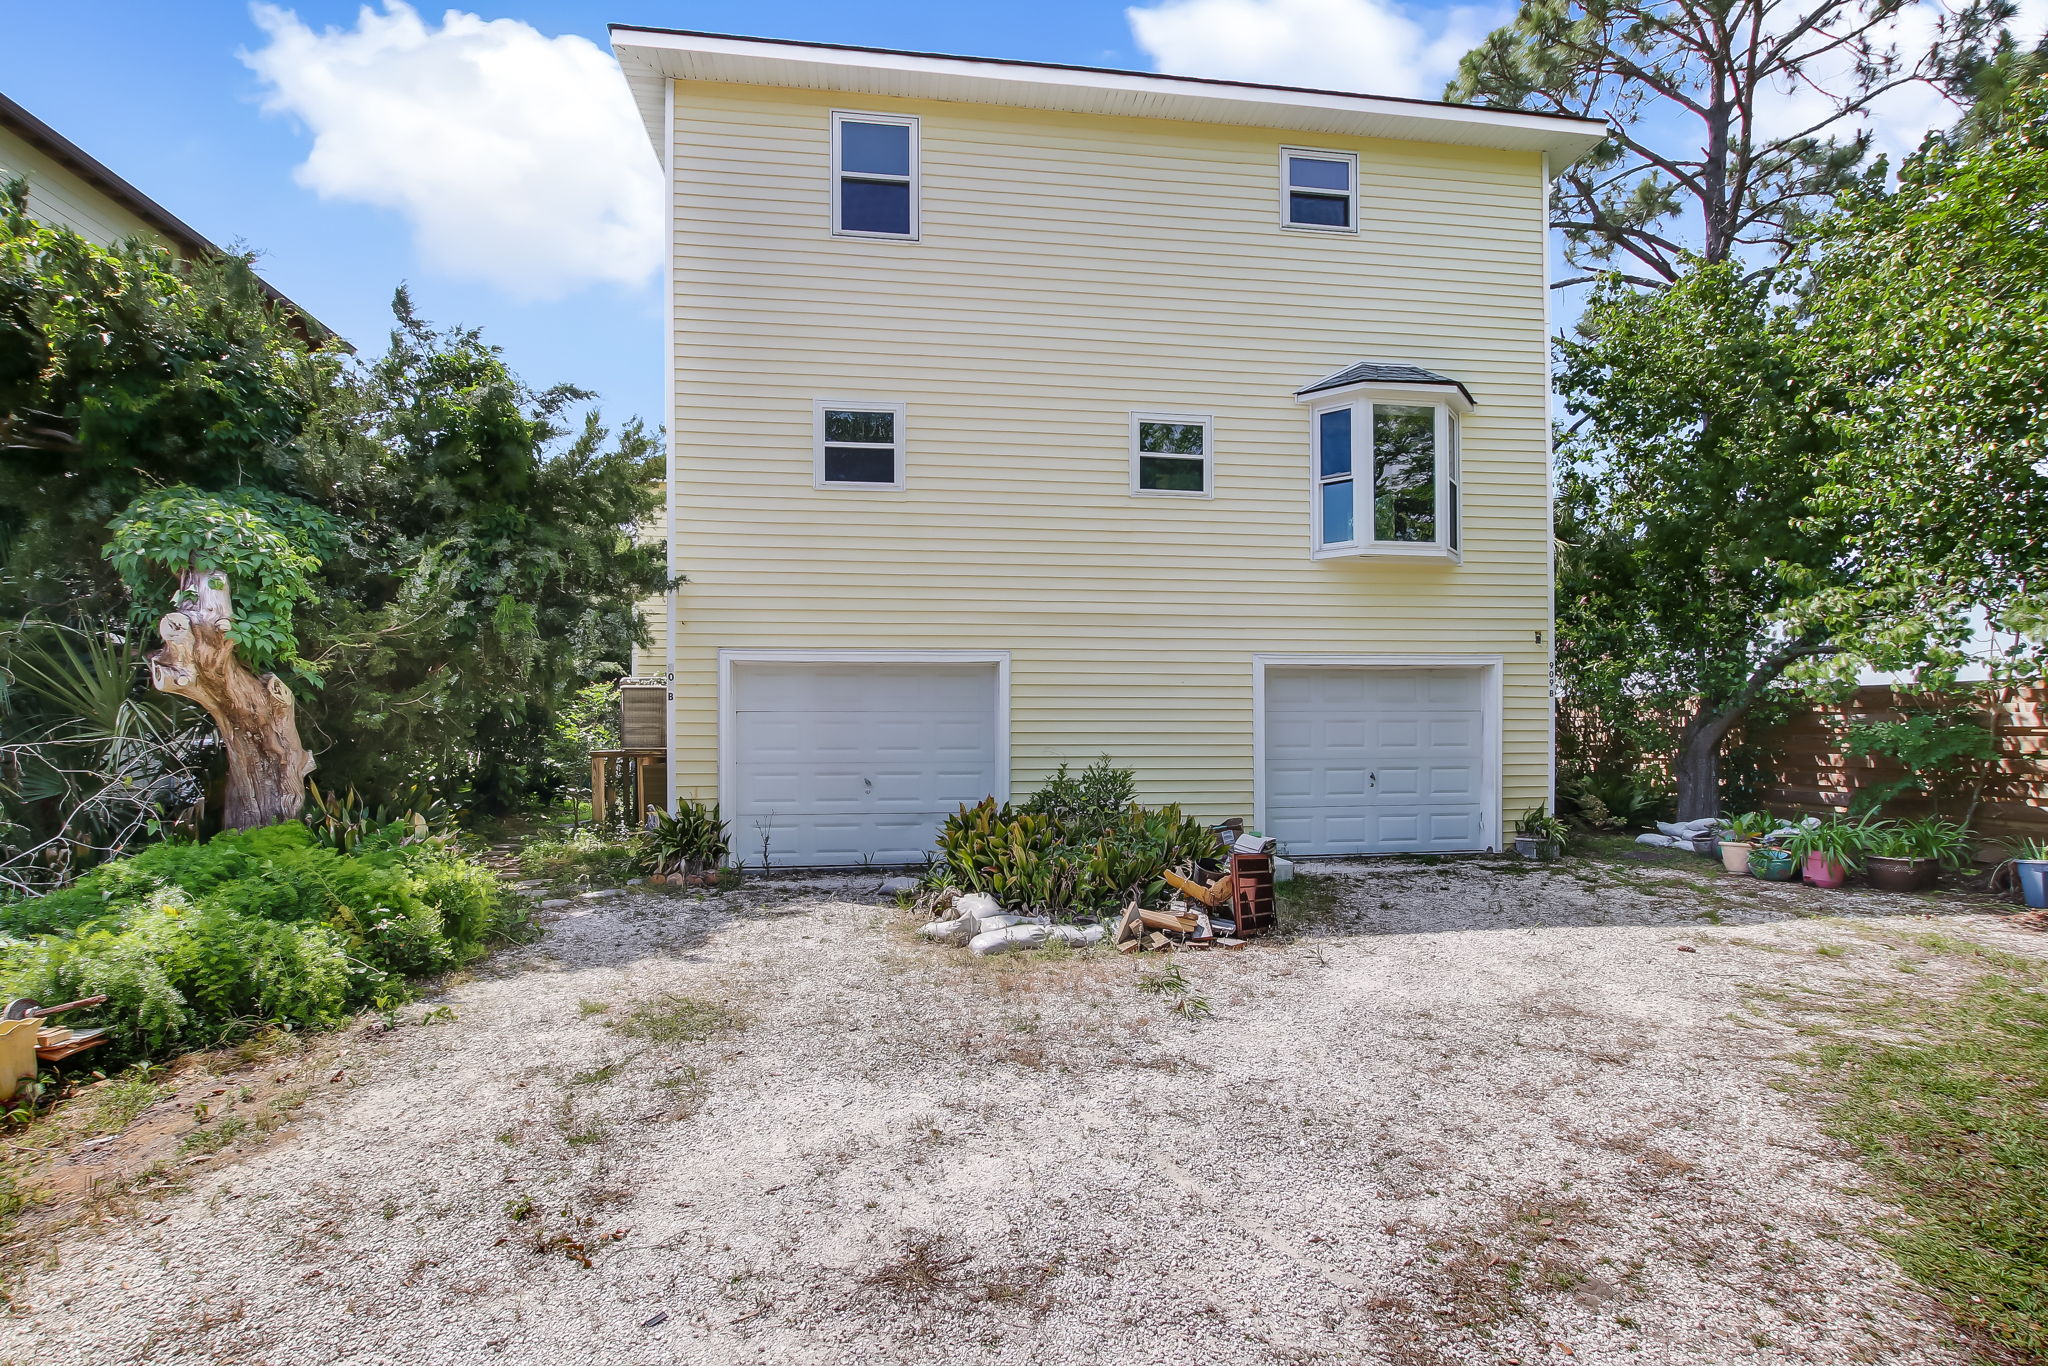  909 Miller Ave A and B, Tybee Island, GA 31328, US